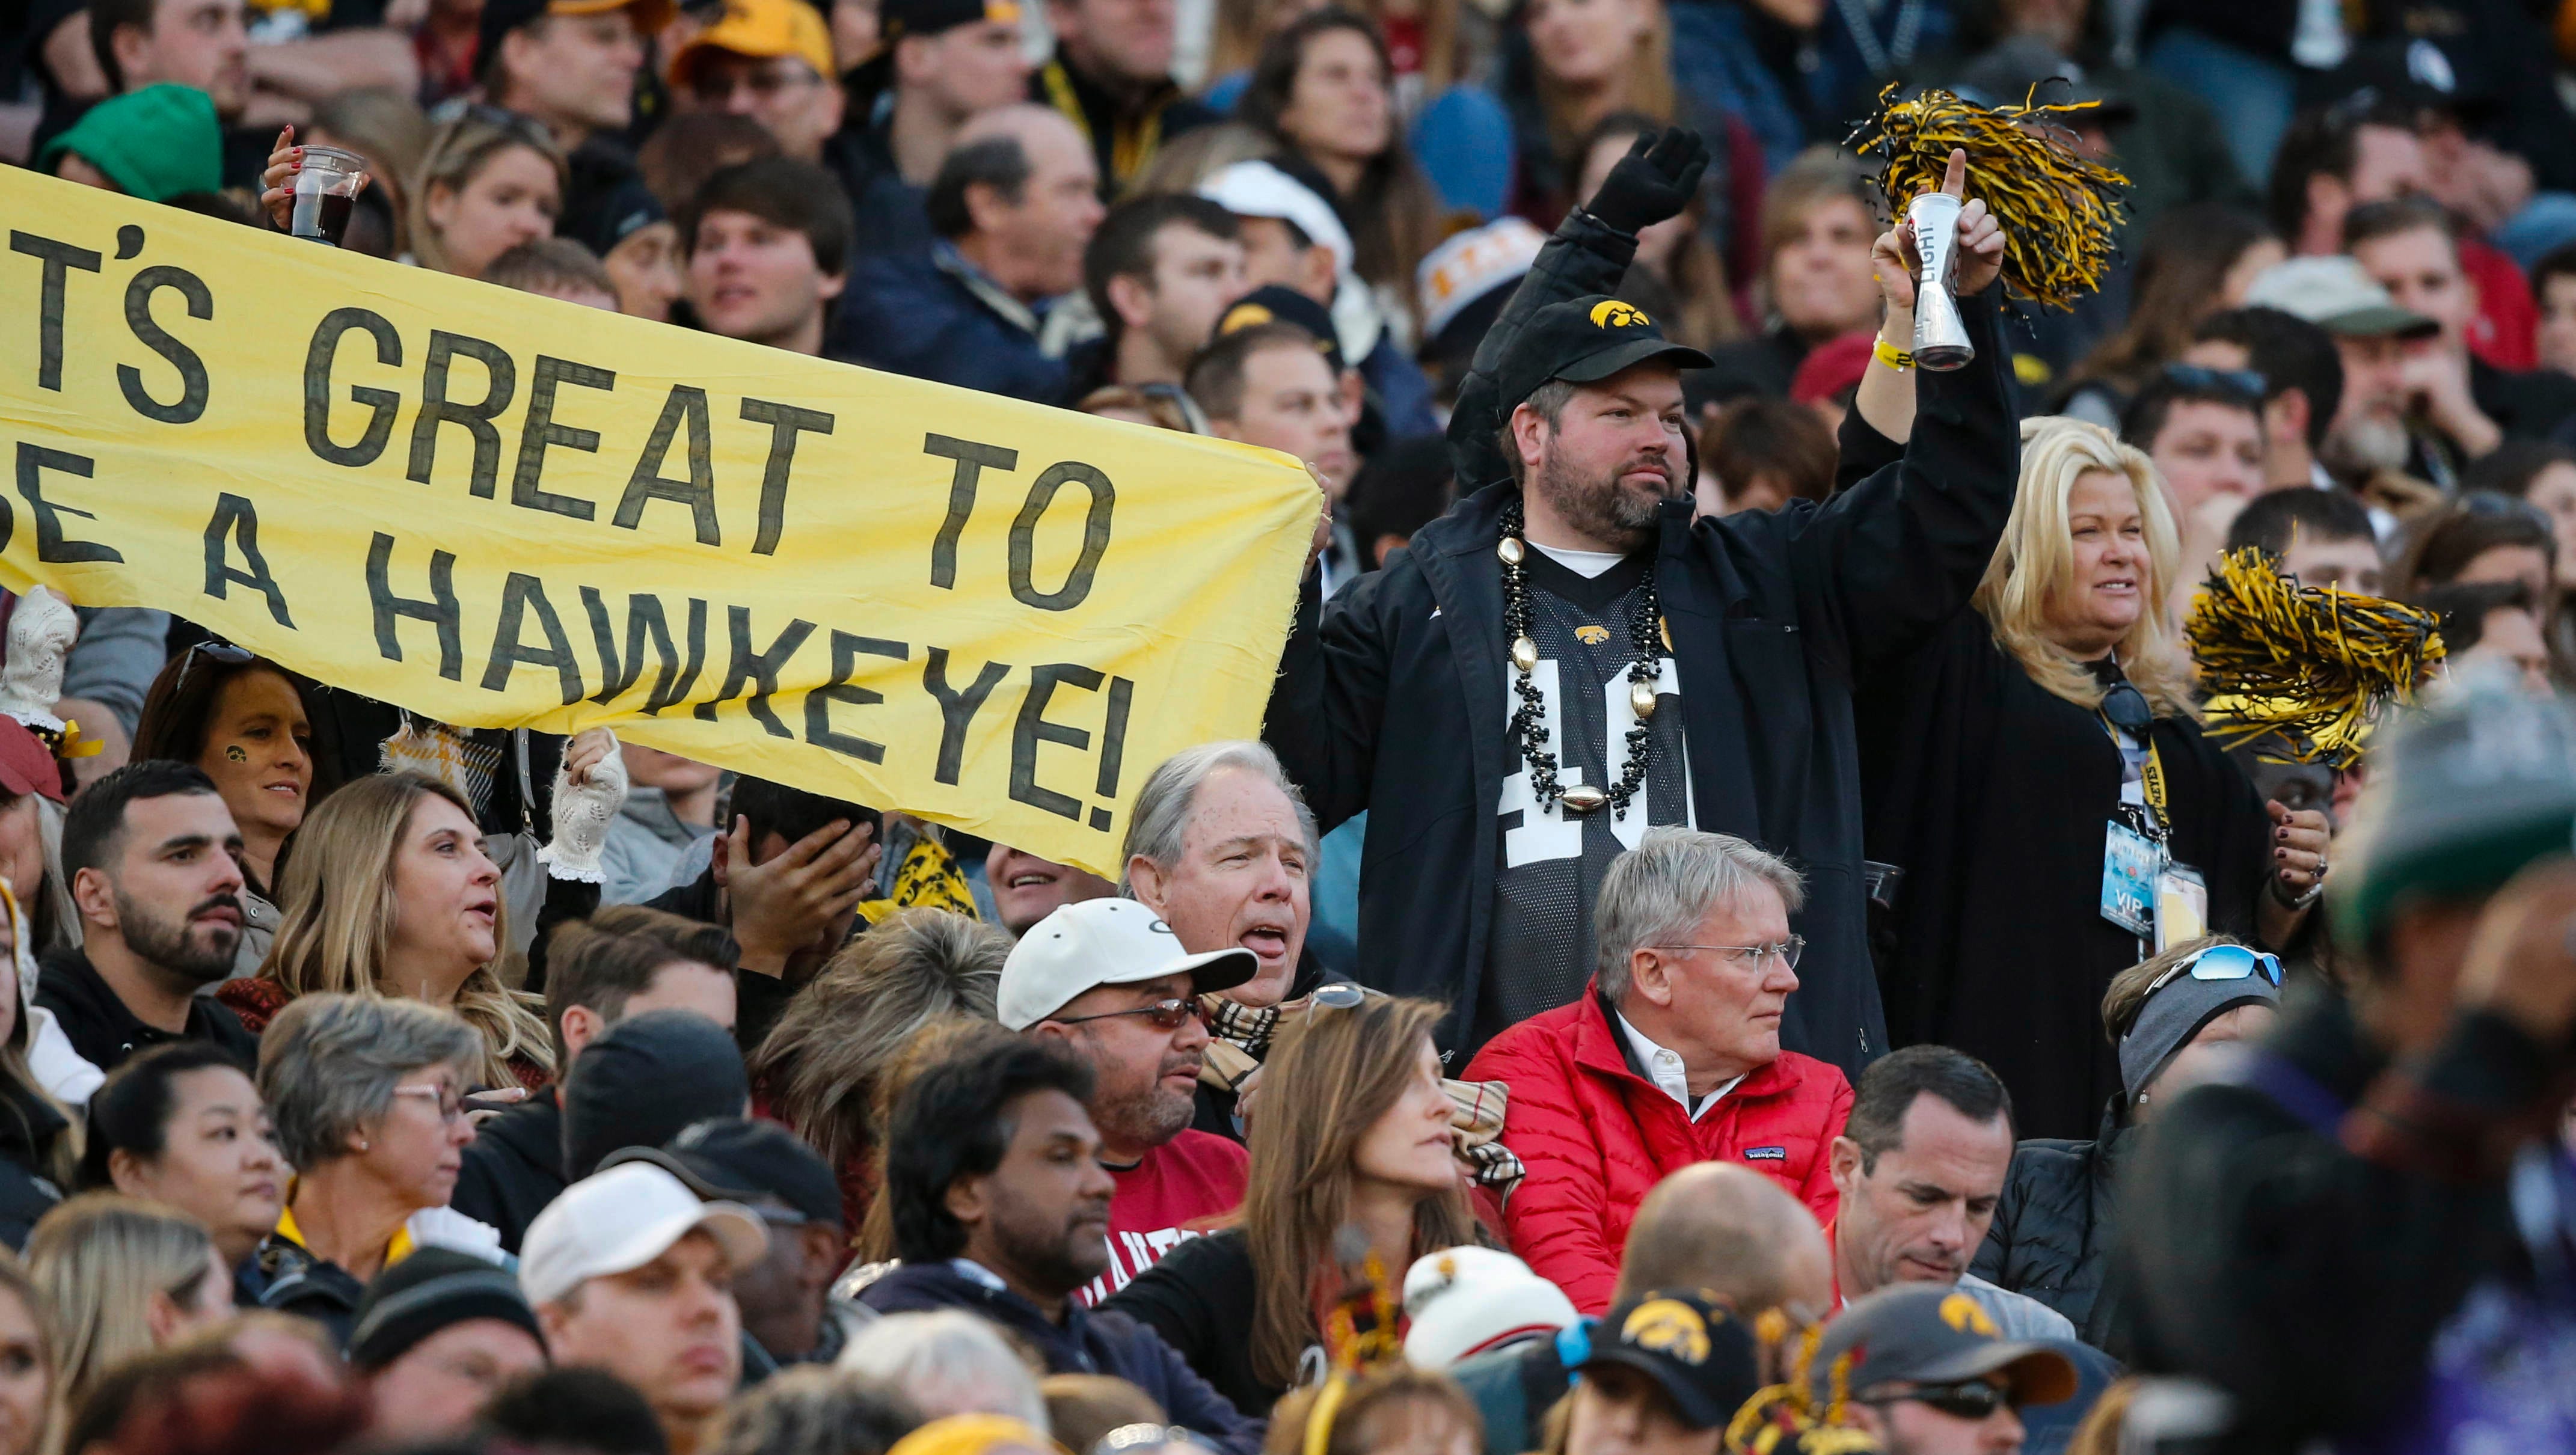 A Hawkeye fan holds up a sign despite the Hawkeyes' lopsided score to Stanford to start the third quarter on Friday, Jan. 1, 2016, at the Rose Bowl in Pasadena, Calif.